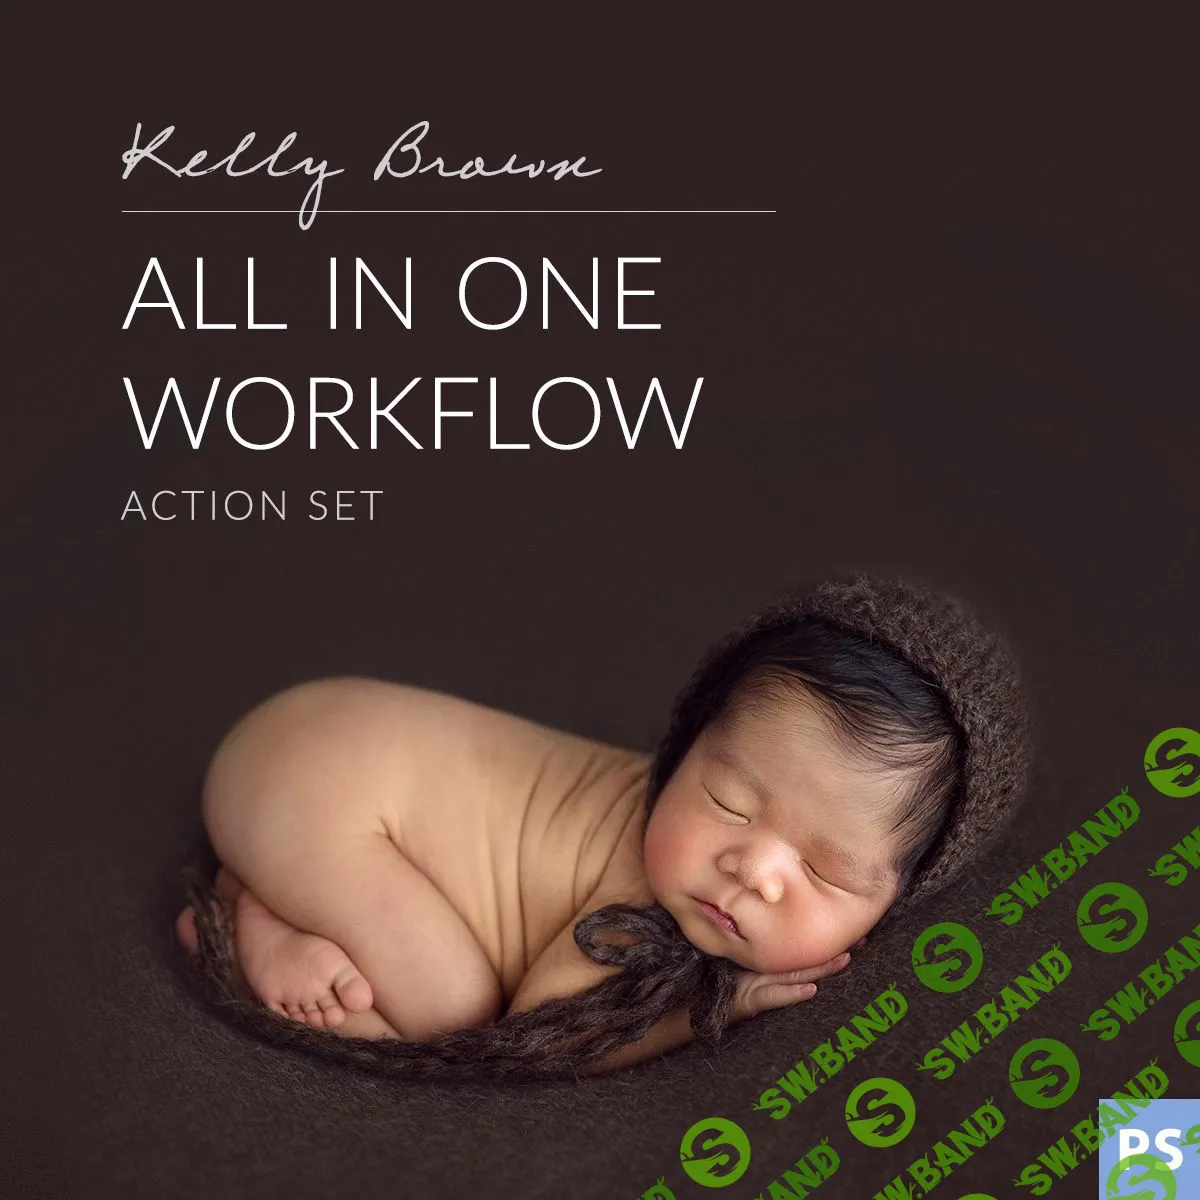 [Kelly Brown] All In One Workflow Action Set (2018)